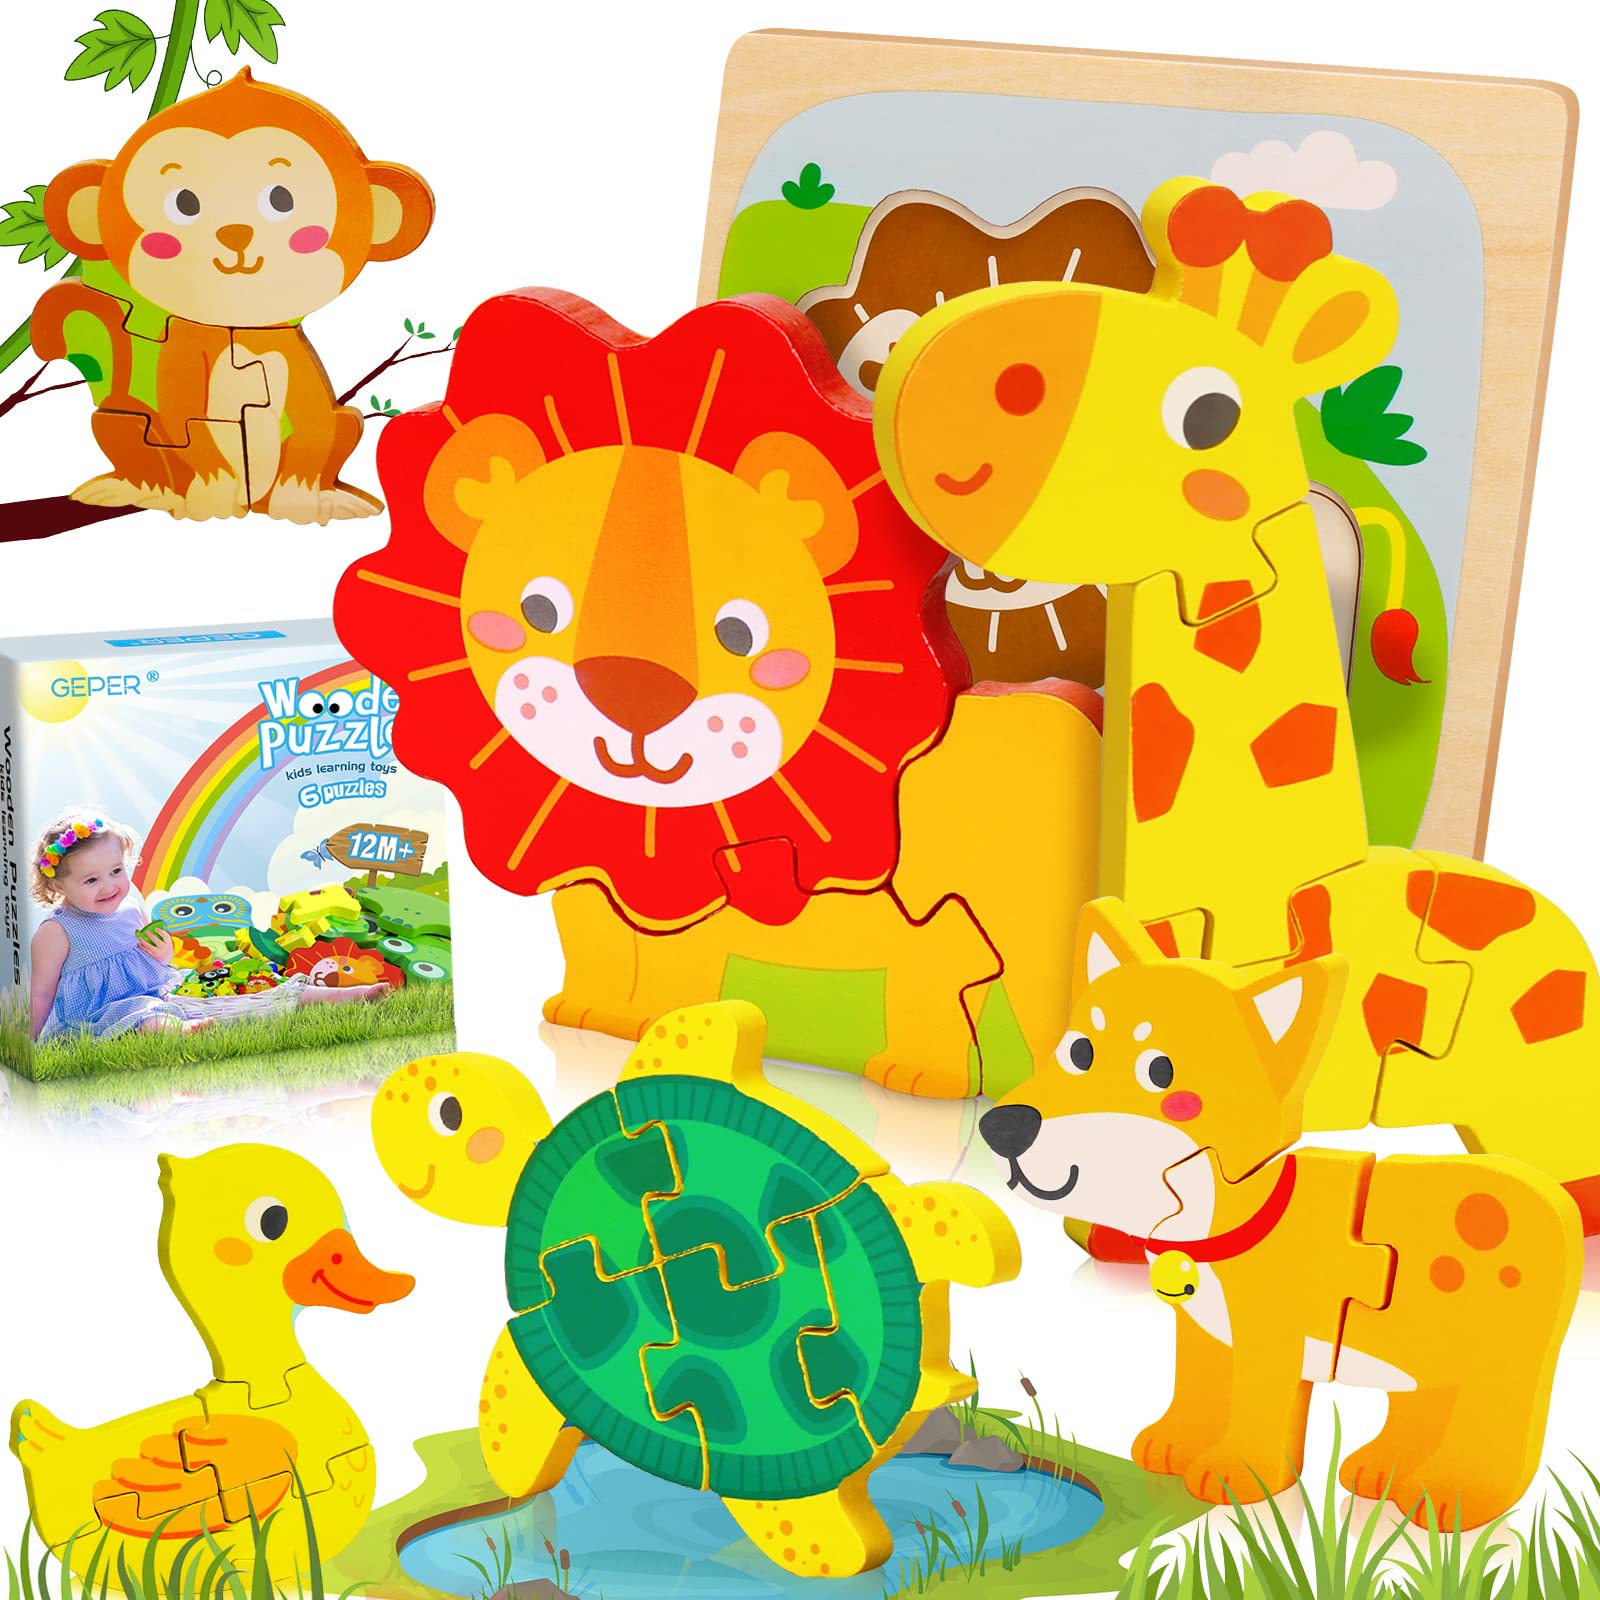 GEPER Wooden Puzzles for Toddlers